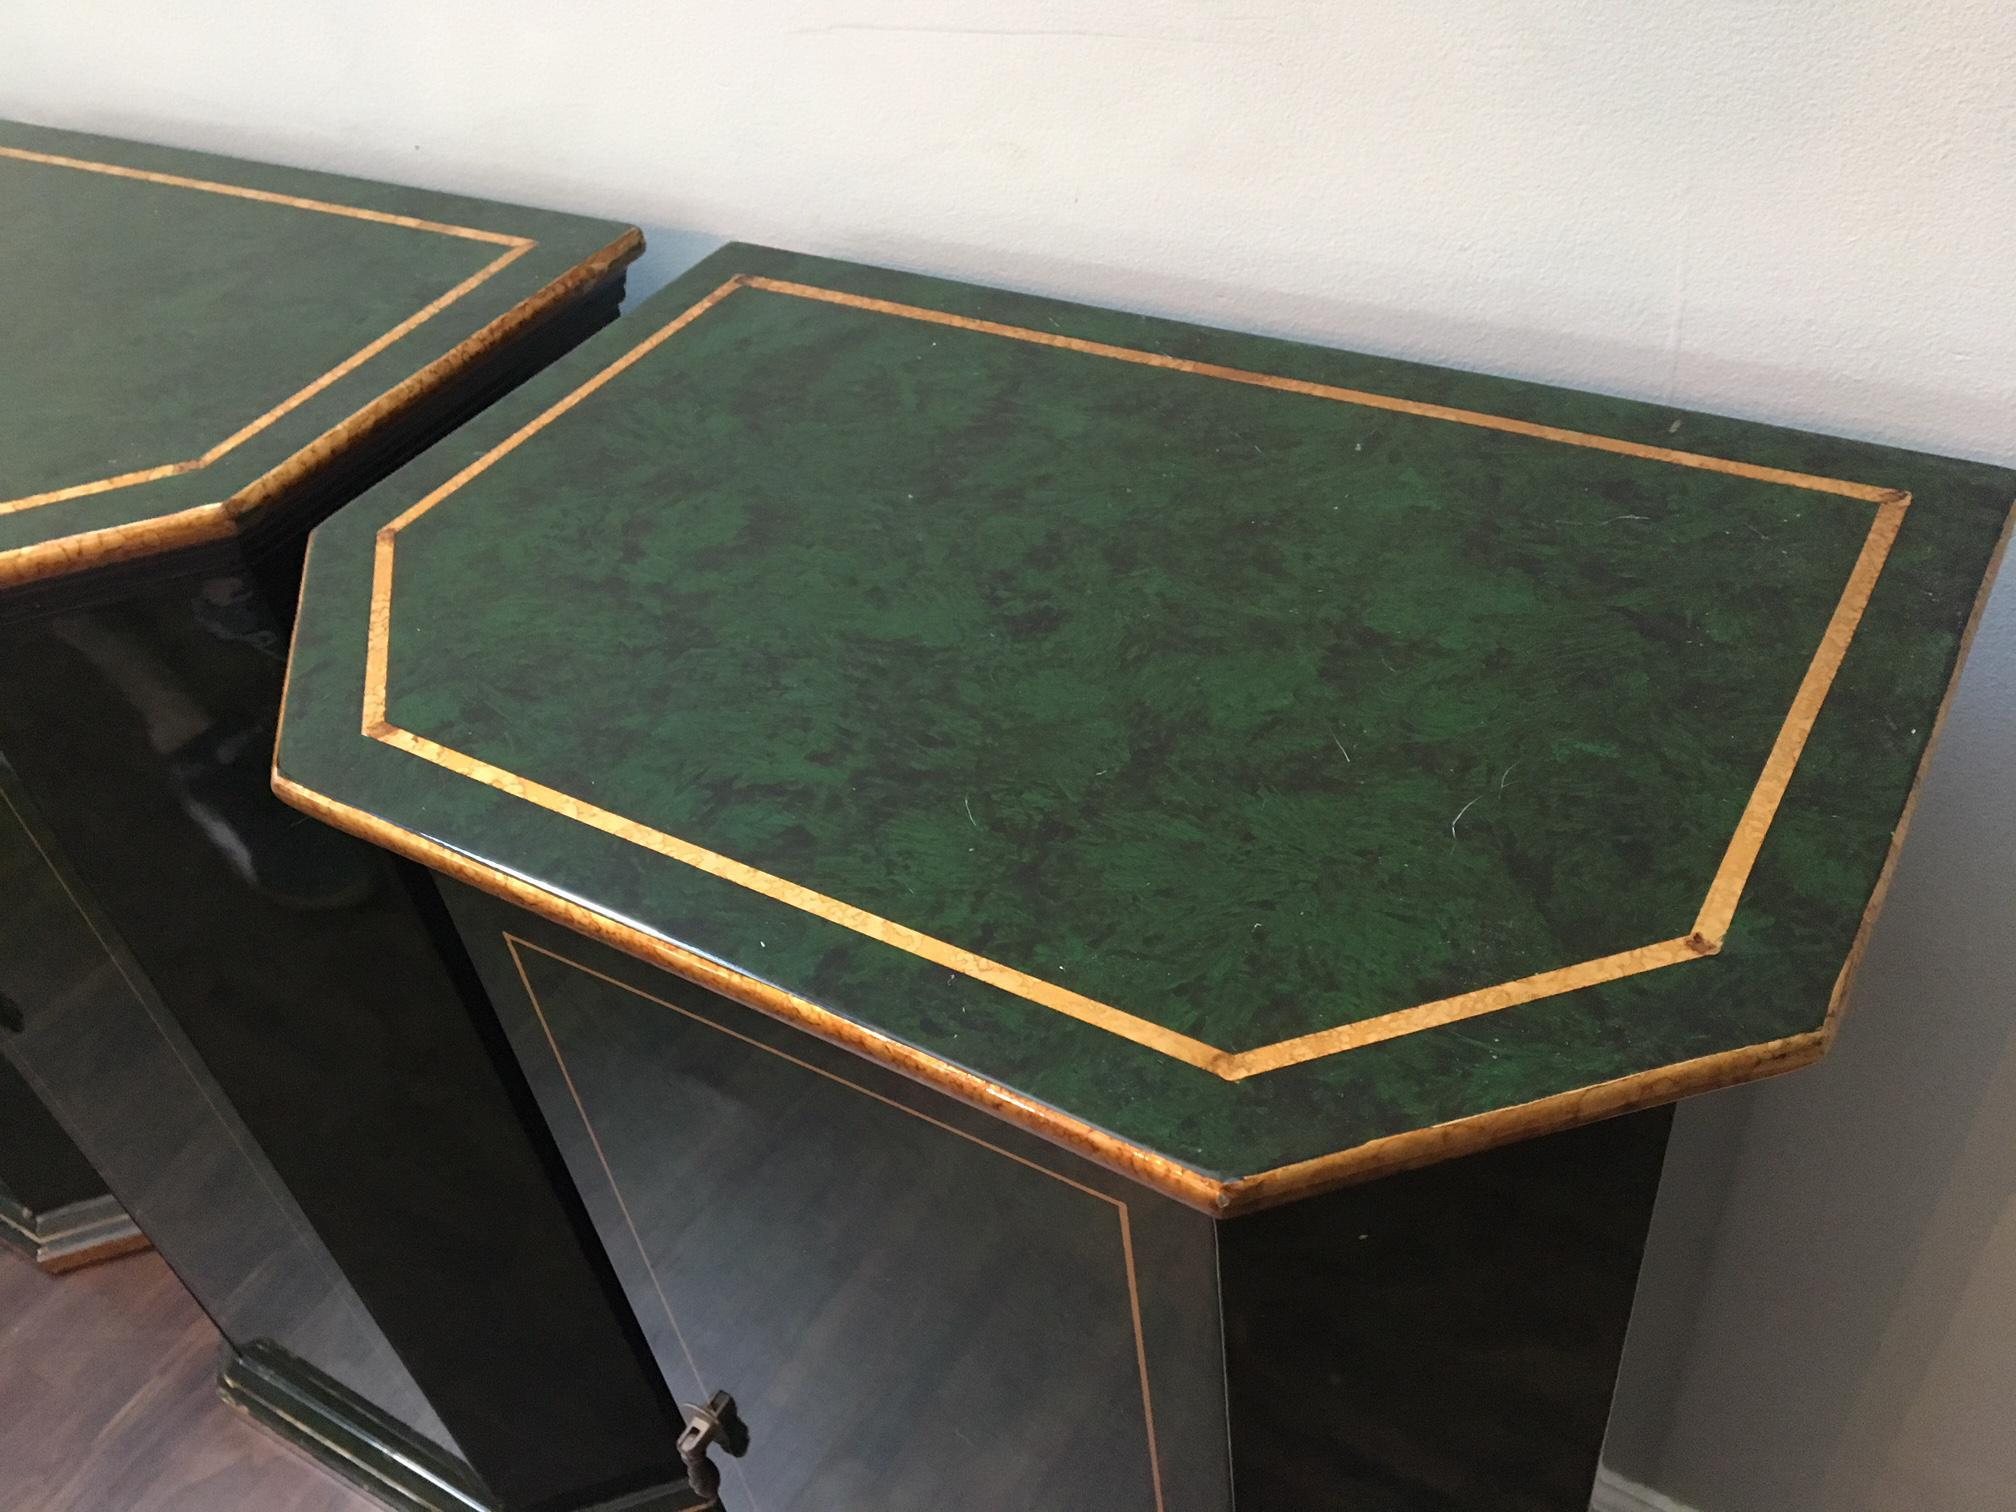 Set of three matching cabinets in faux-malachite with gold gilt trim in an art deco style. Also perfect for your Hollywood Regency decor. Each cabinet opens to reveal shelved storage space. Brass tassel hardware. Excellent vintage condition with a